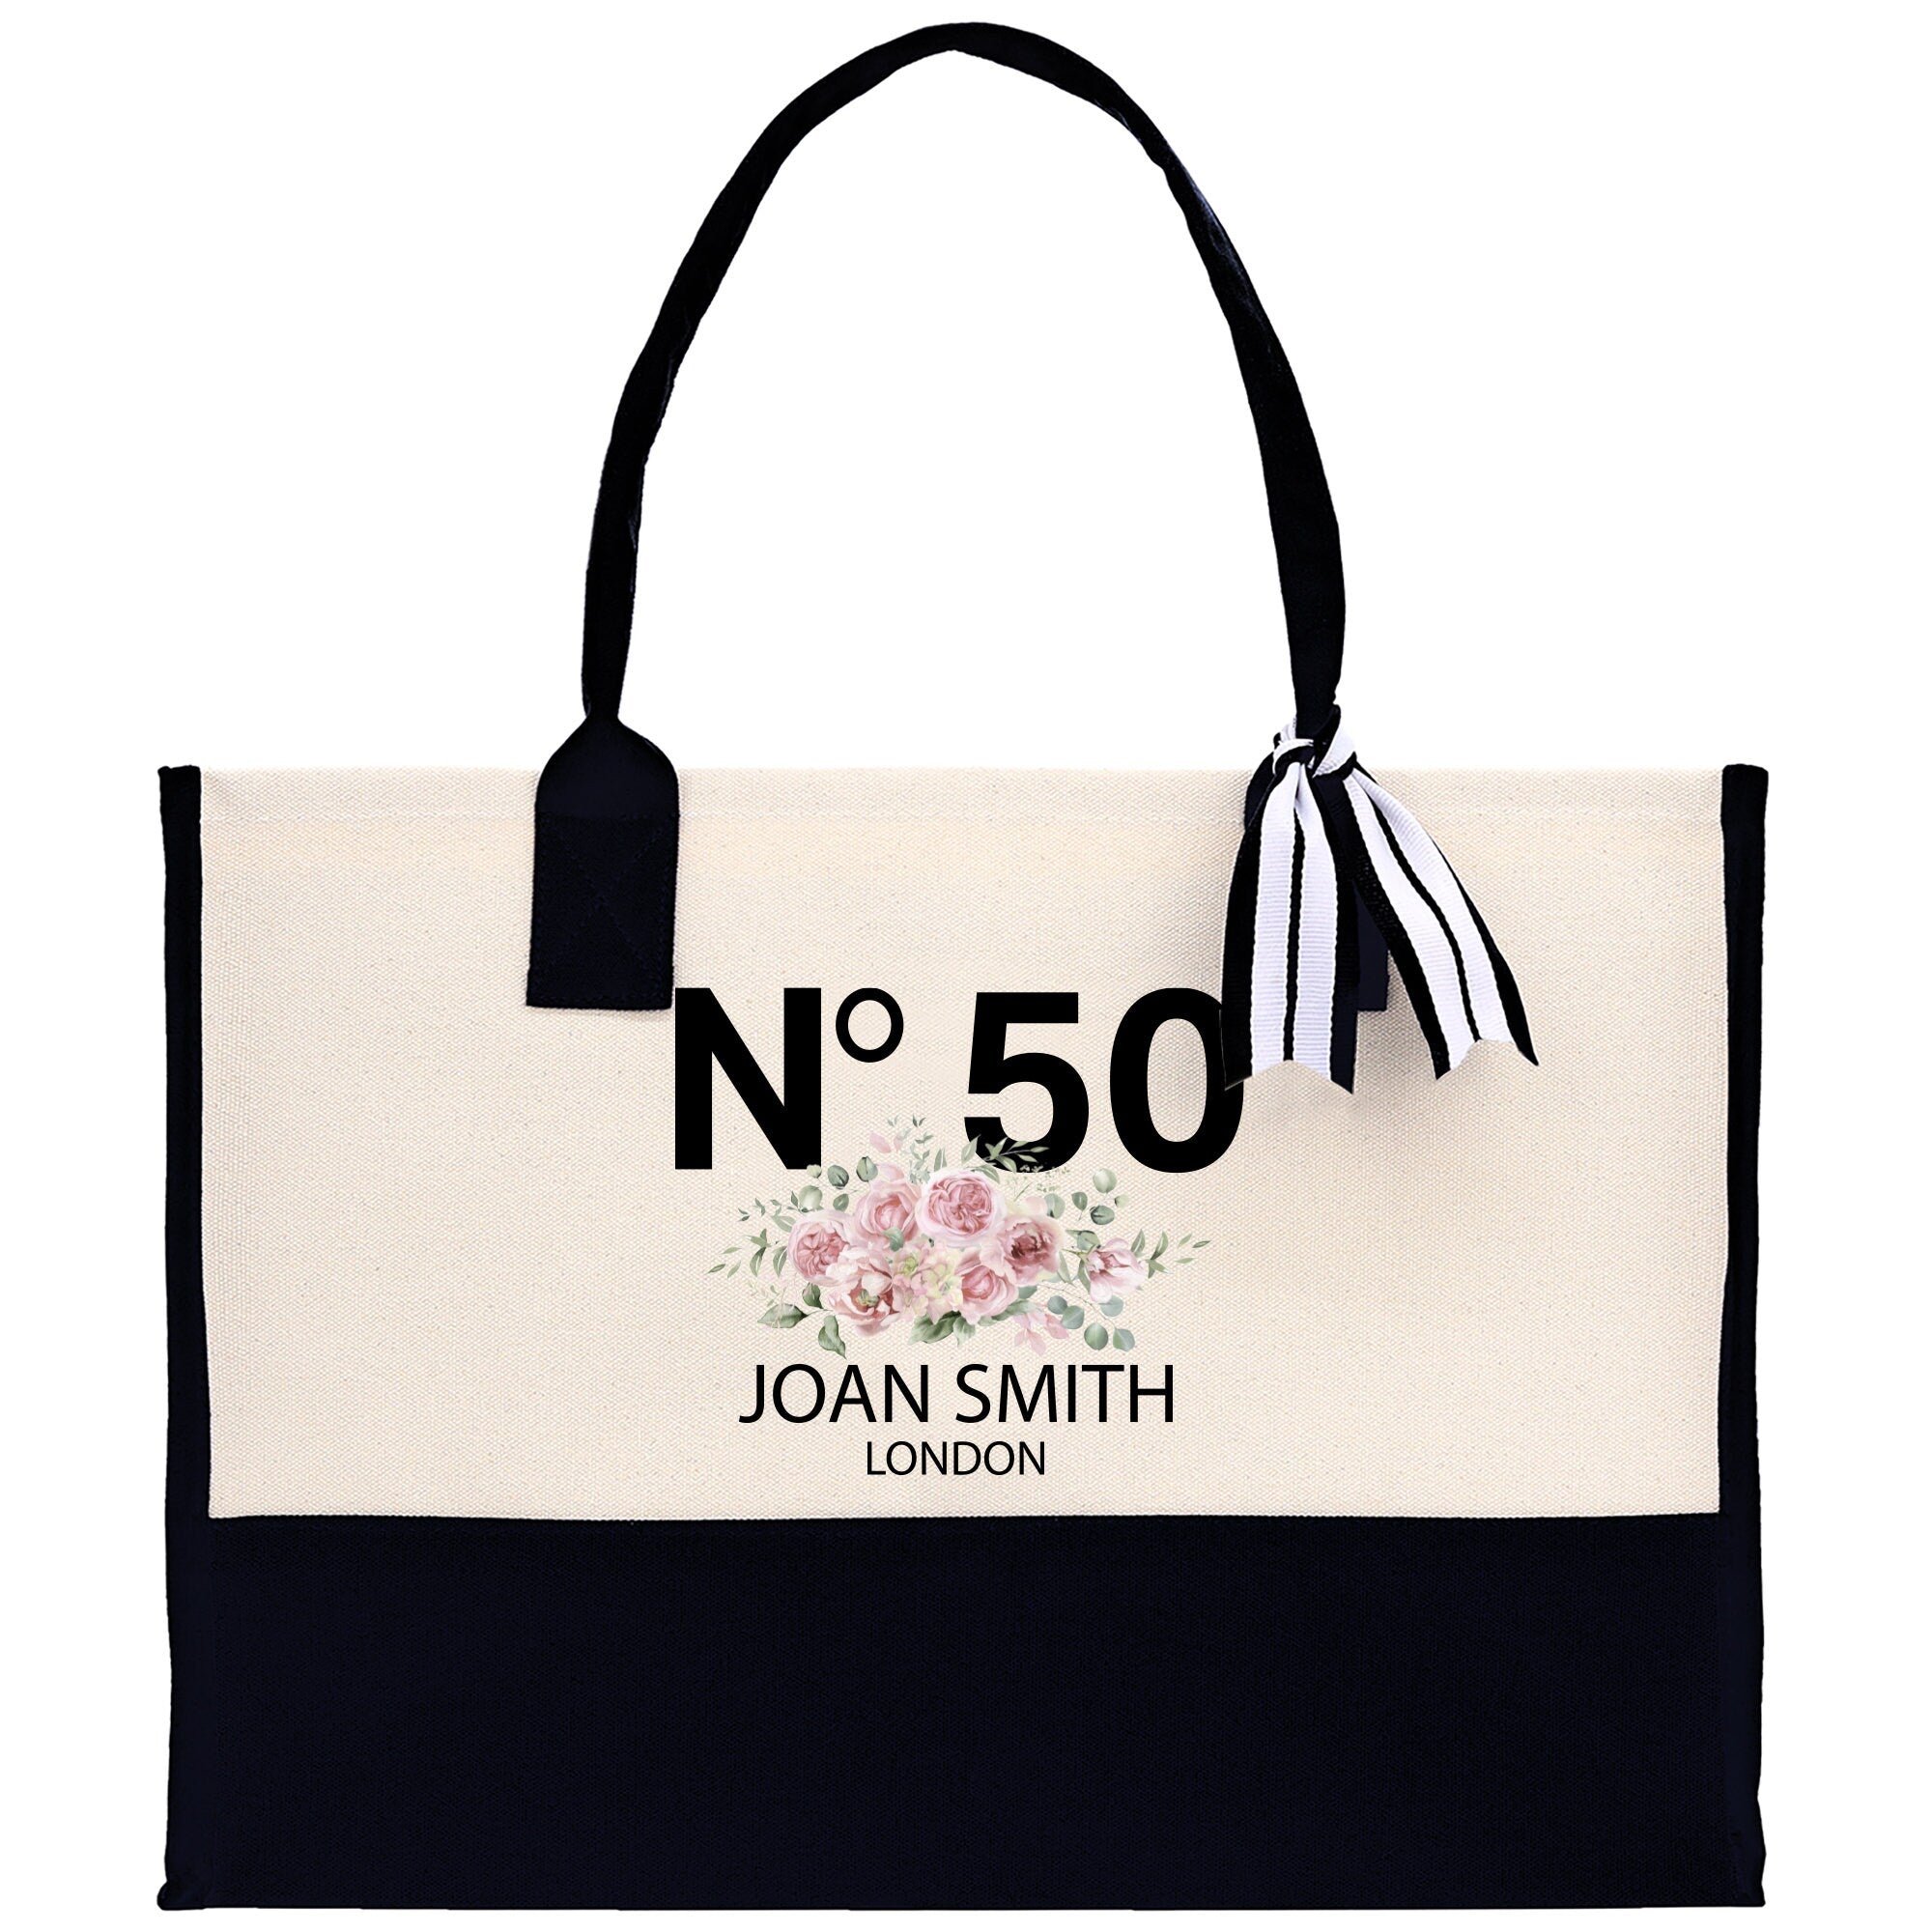 a black and white tote bag with a bow on it